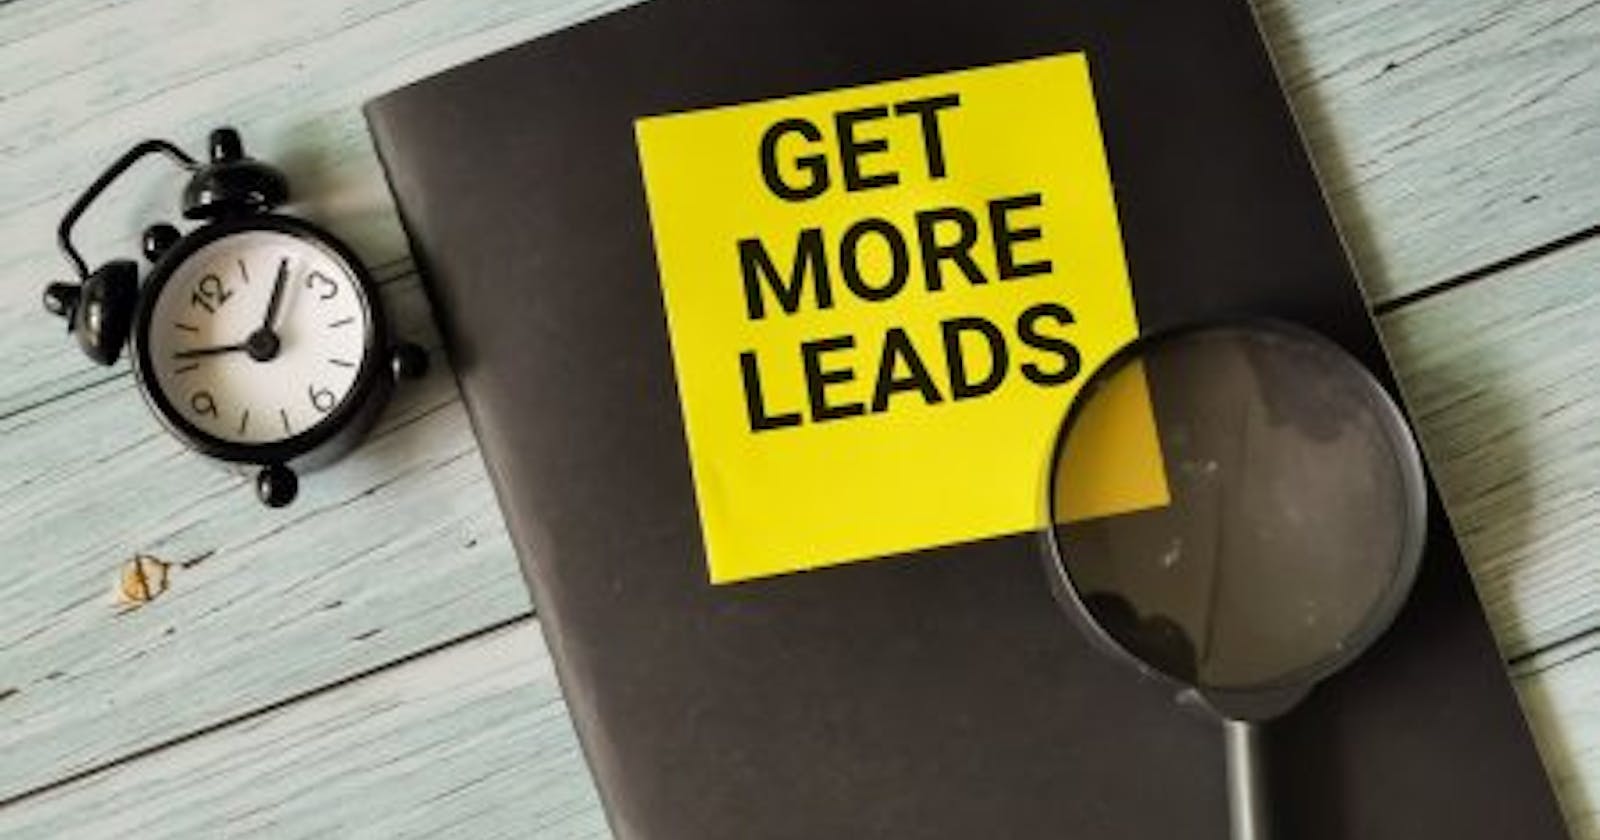 How LinkedIn Lead Generation Can Help Small Businesses?